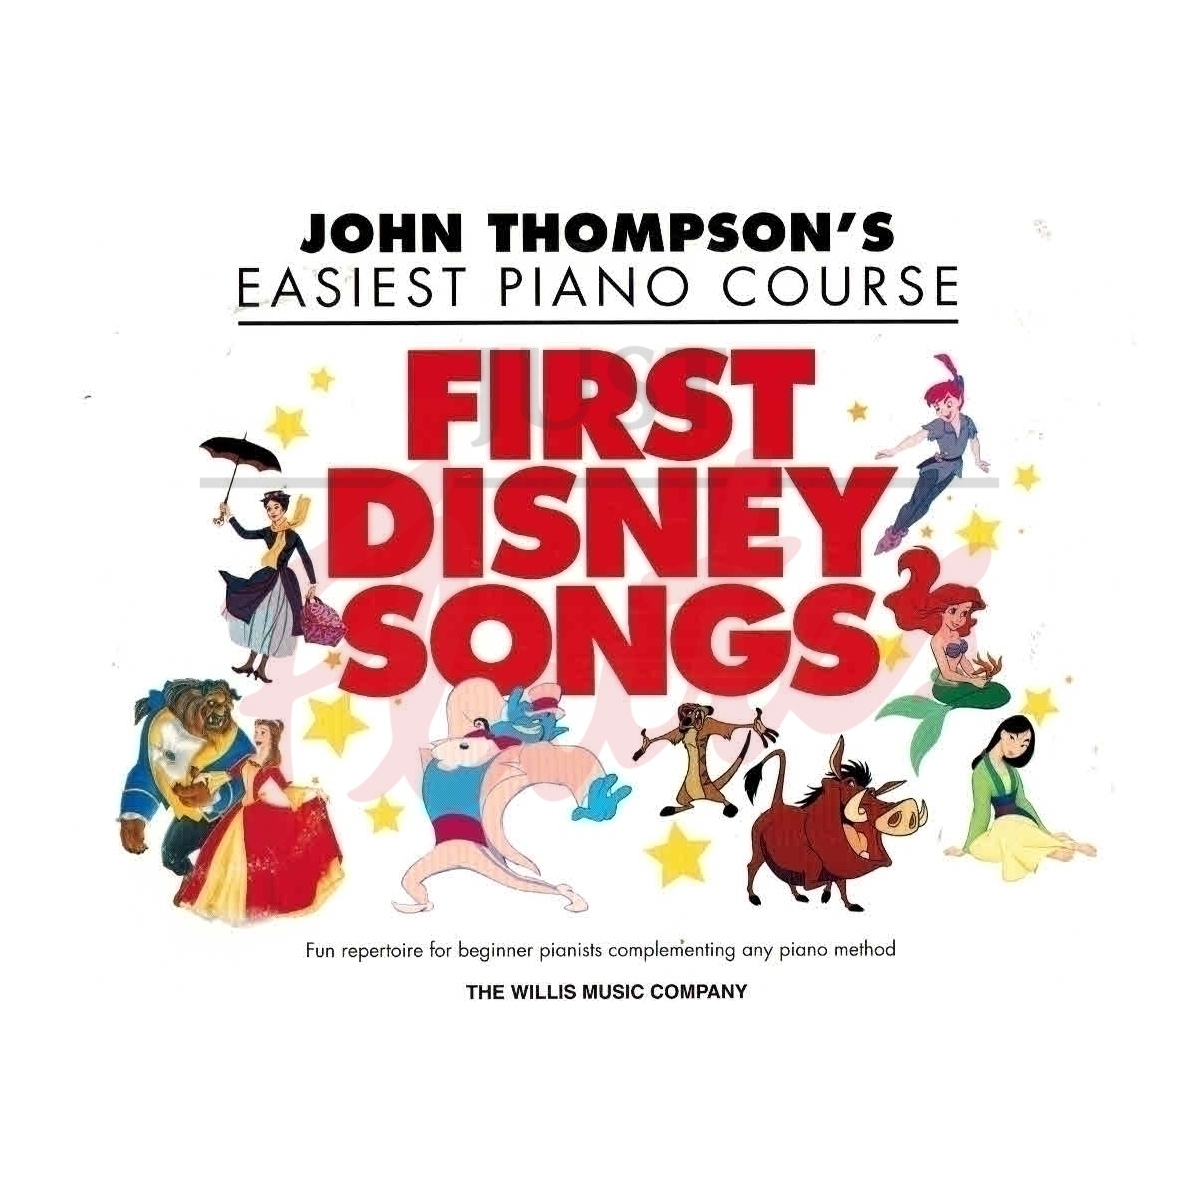 John Thompson's Easiest Piano Course - First Disney Songs